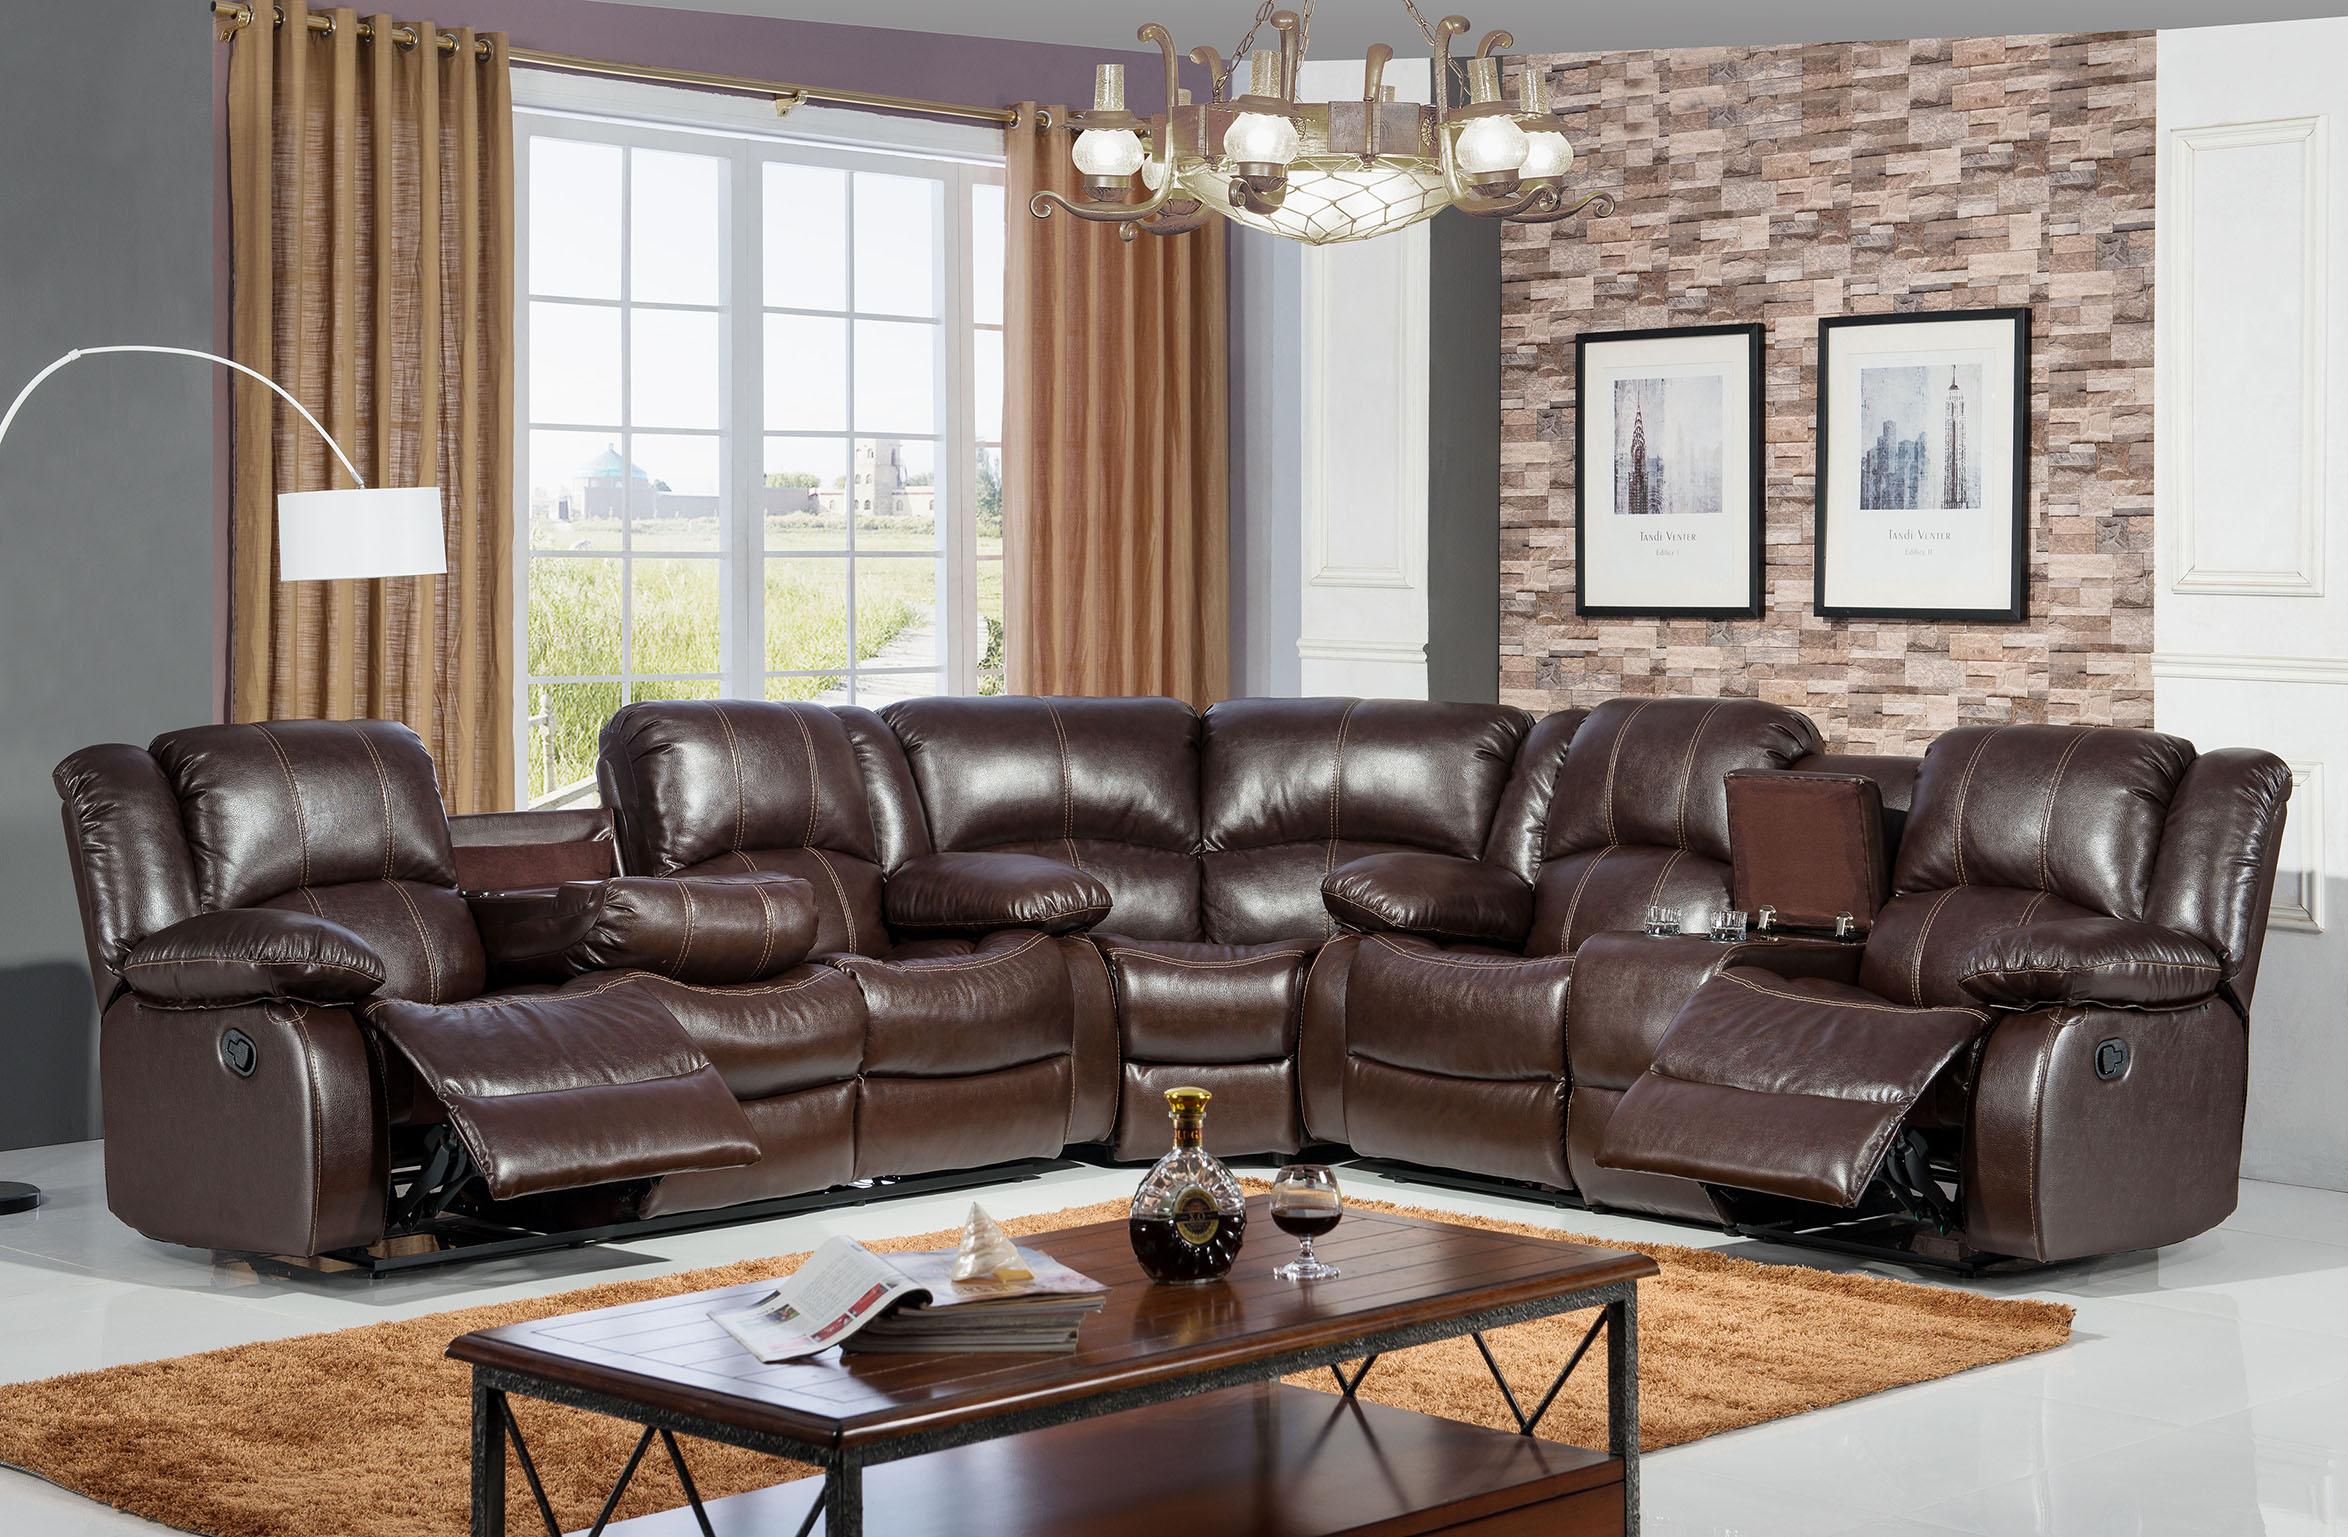 

    
Brown Faux Leather Reclining Motion Sectional Sofa w/ Storage Console McFerran SF3592
